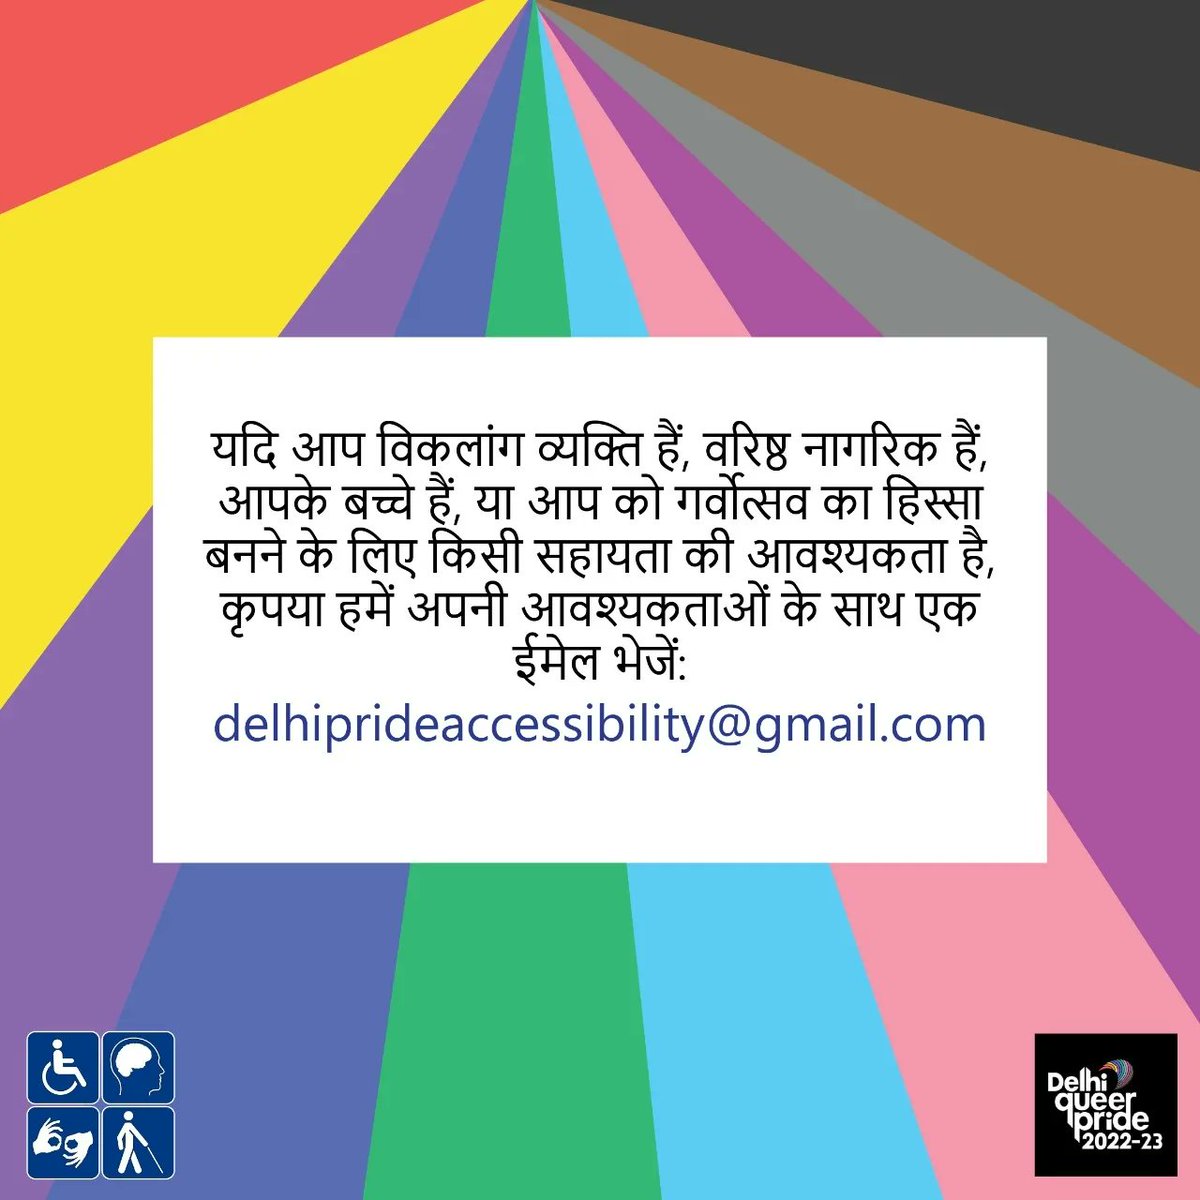 January 8th, 2022 See you there #delhiqueerpride #queer #pride